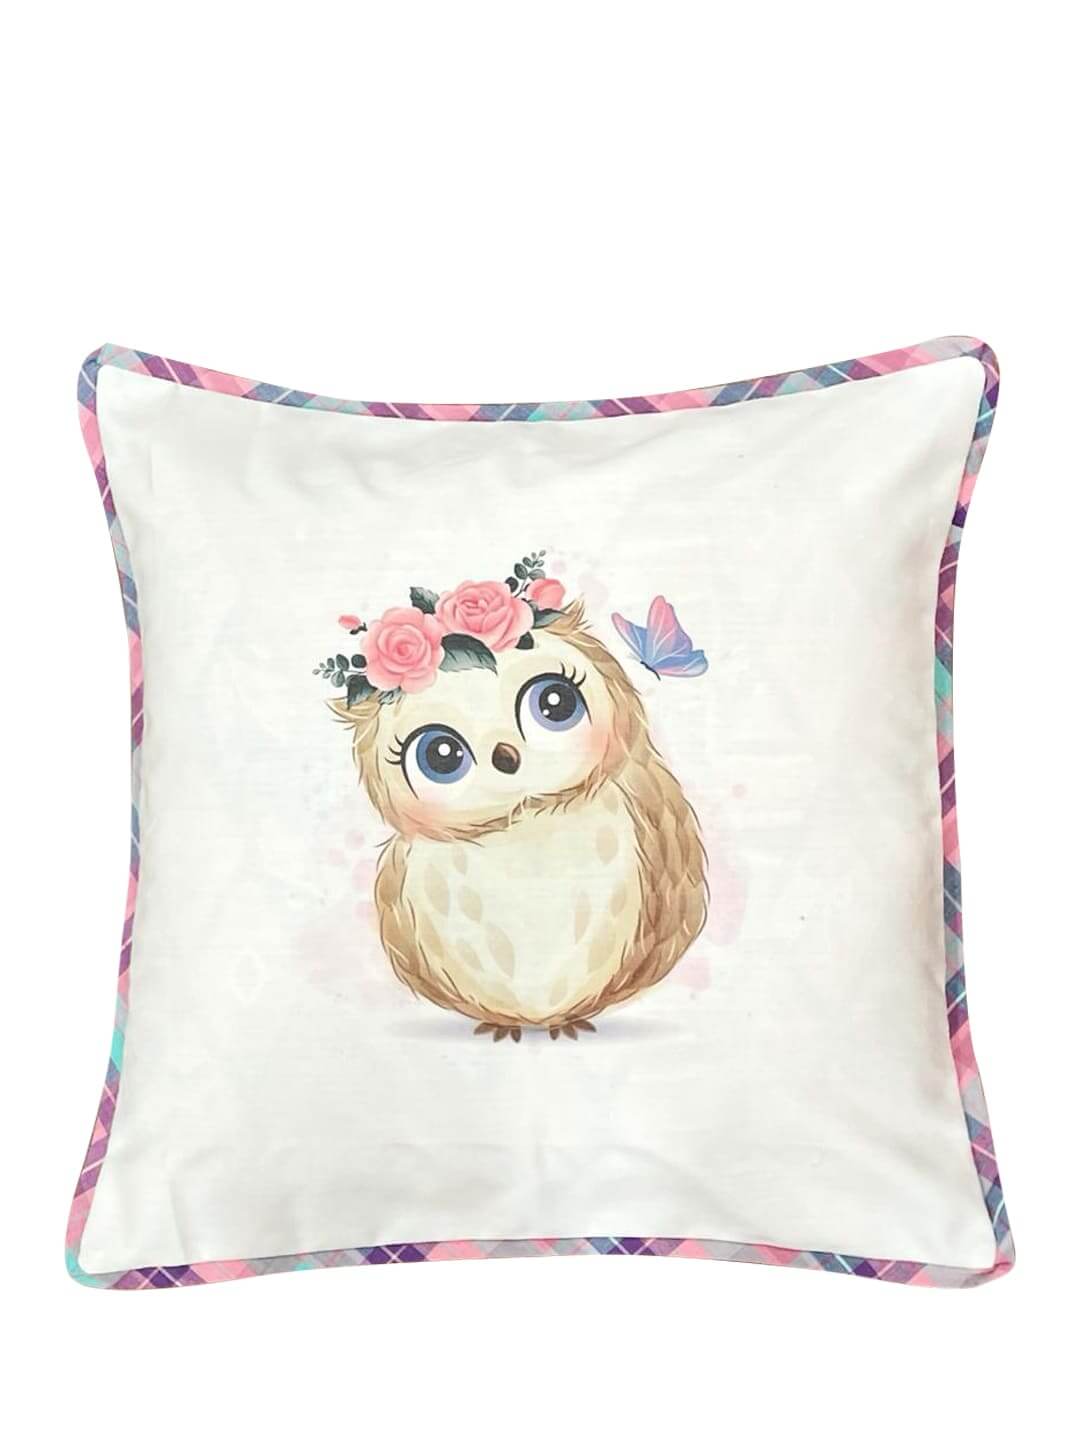 Handwoven Cotton Sublimation Printed Cushion Cover-Owl with Crown of Roses